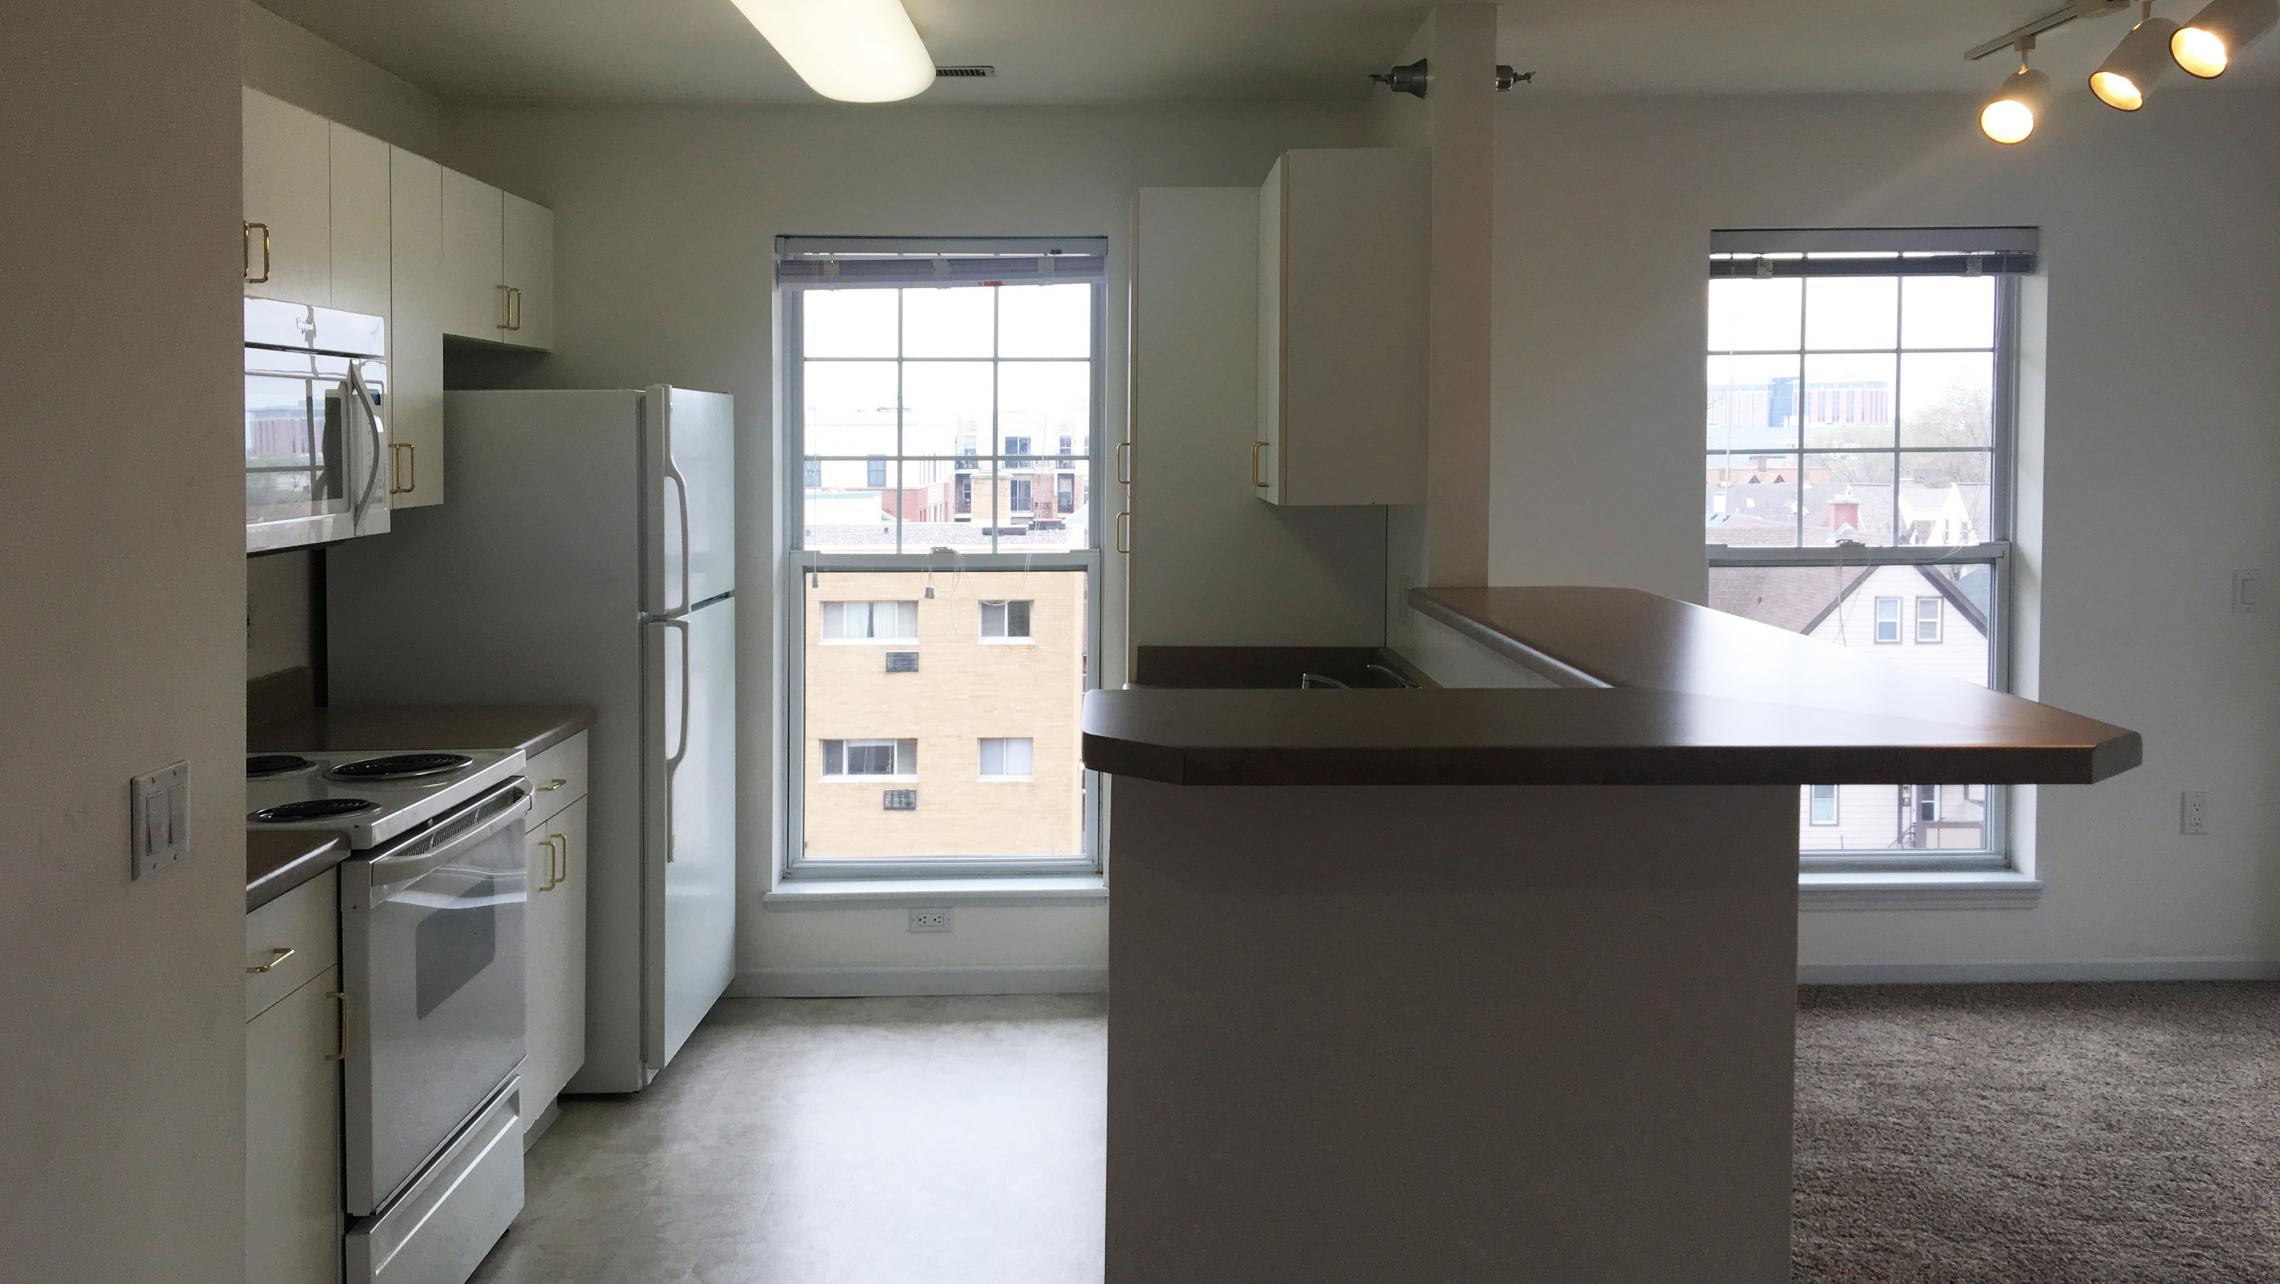 City-Place-Apartment-404-Two-Bedroom-Fireplace-Natural-Light-Sunny-Bright-Bathroom-Kitchen-Living-Balcony-Downtown-Madison-Bike-City-Capitol-Lifestyle-Home-Laundry-Storage-Closet-Bathtub